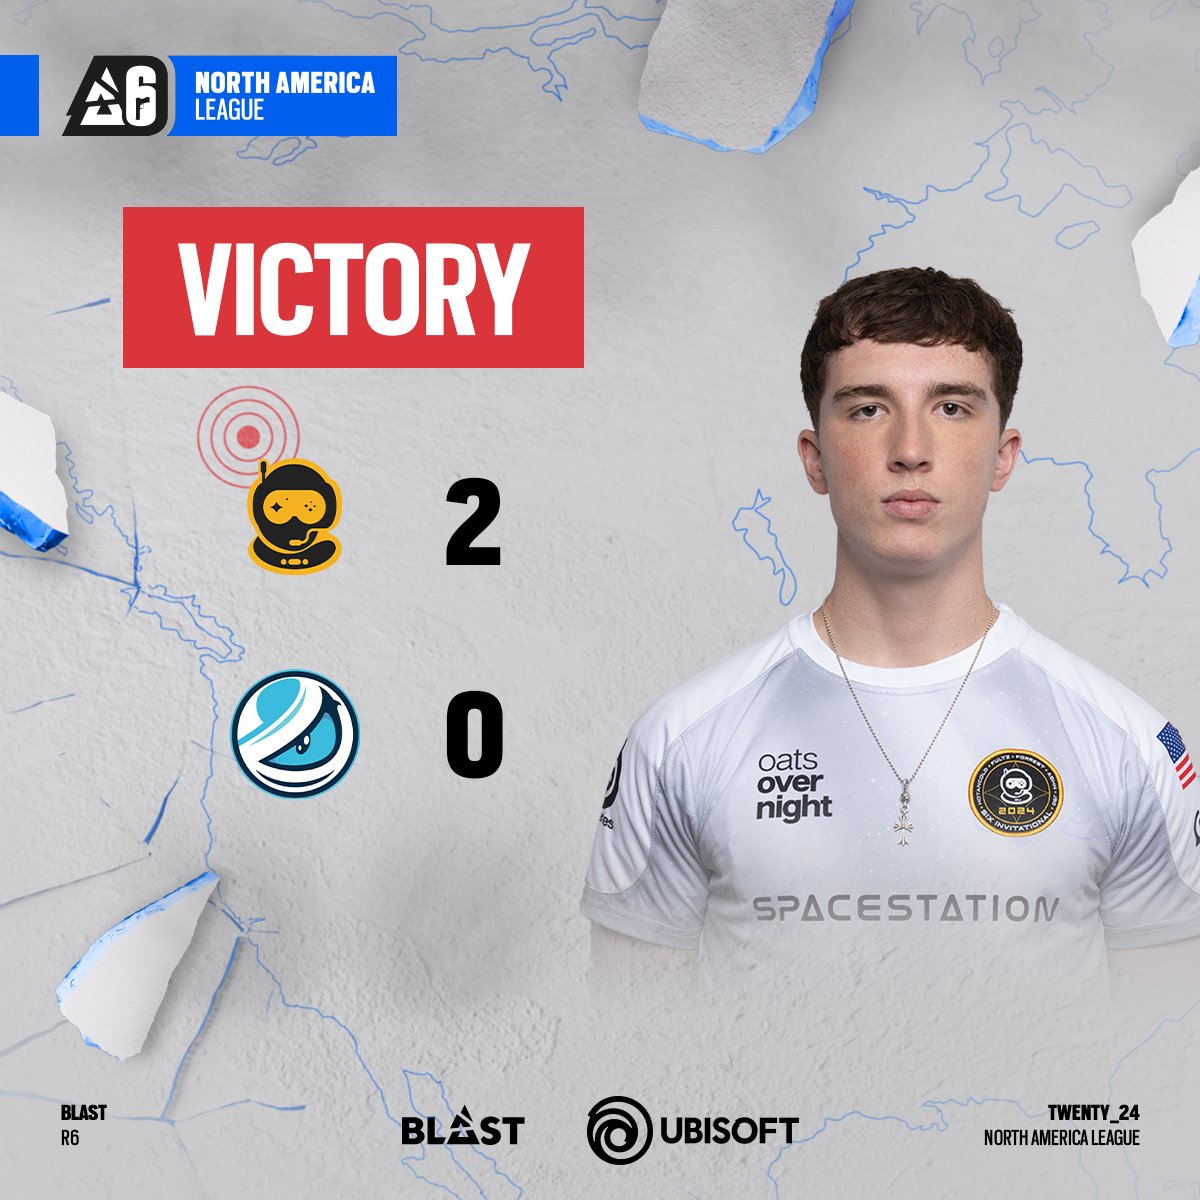 We're about to see one fantastic Grand Final 😍 @Spacestation dominated @Luminosity 2-0 to secure their spot in the final! #BLASTR6